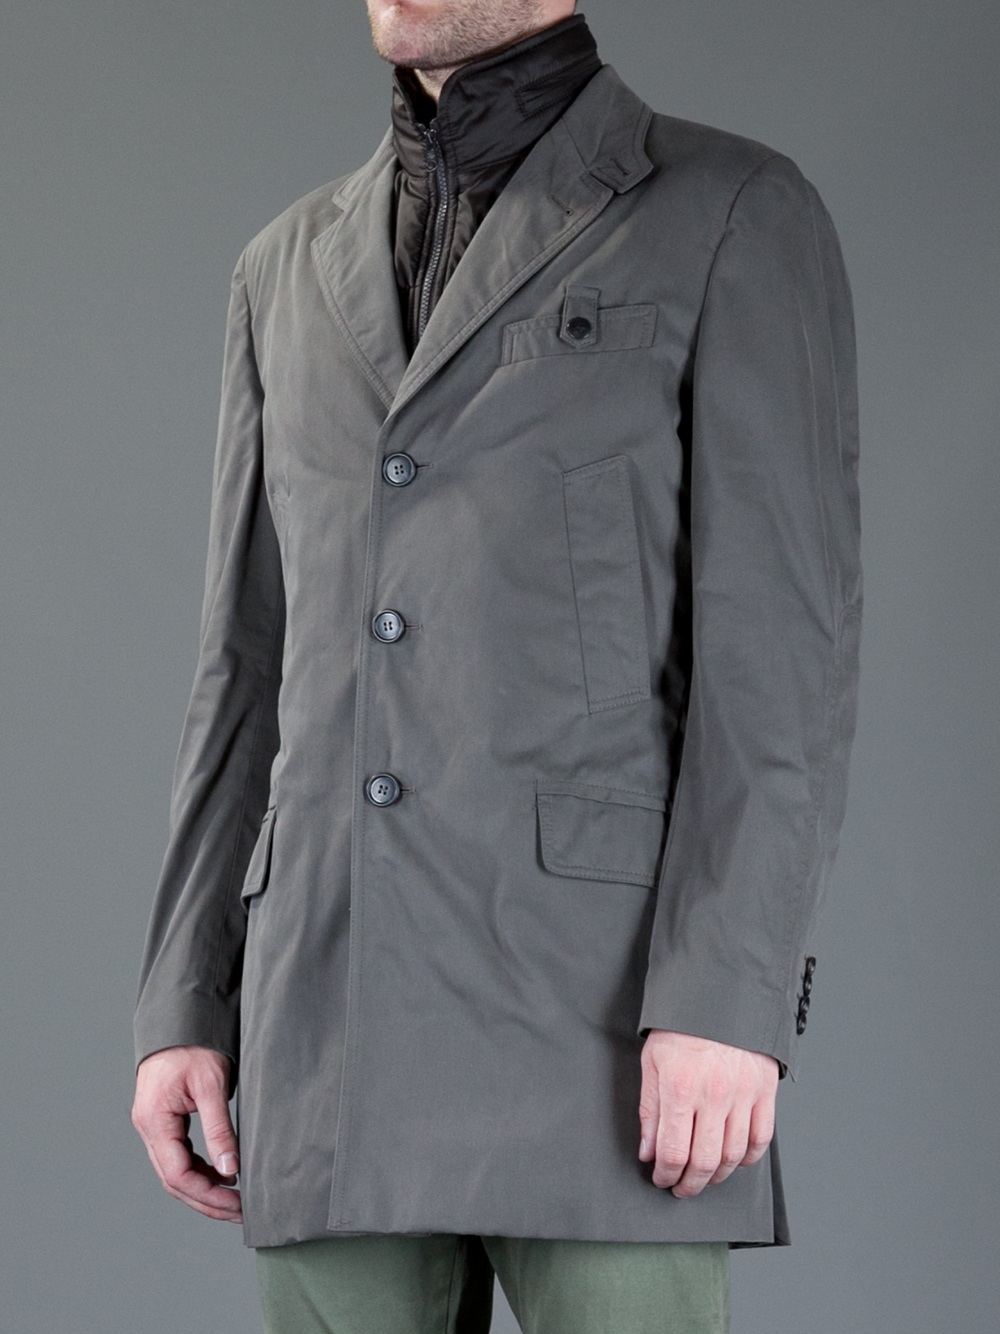 Fay Layered Driving Coat in Brown for Men - Lyst